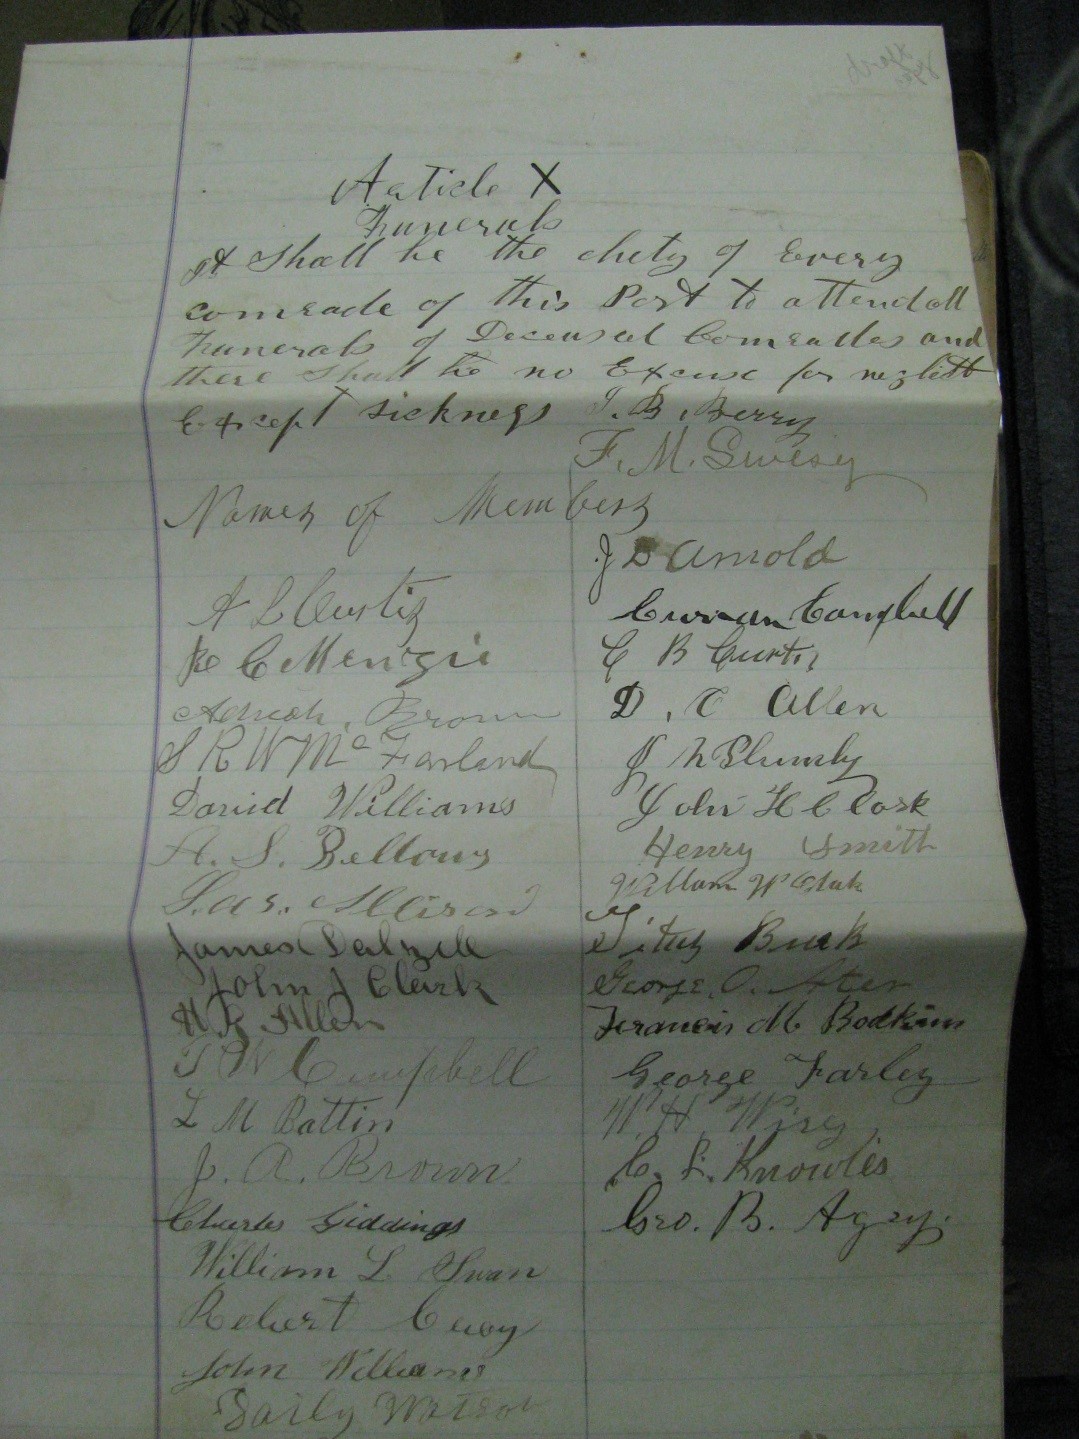 Signatures of the Comrades